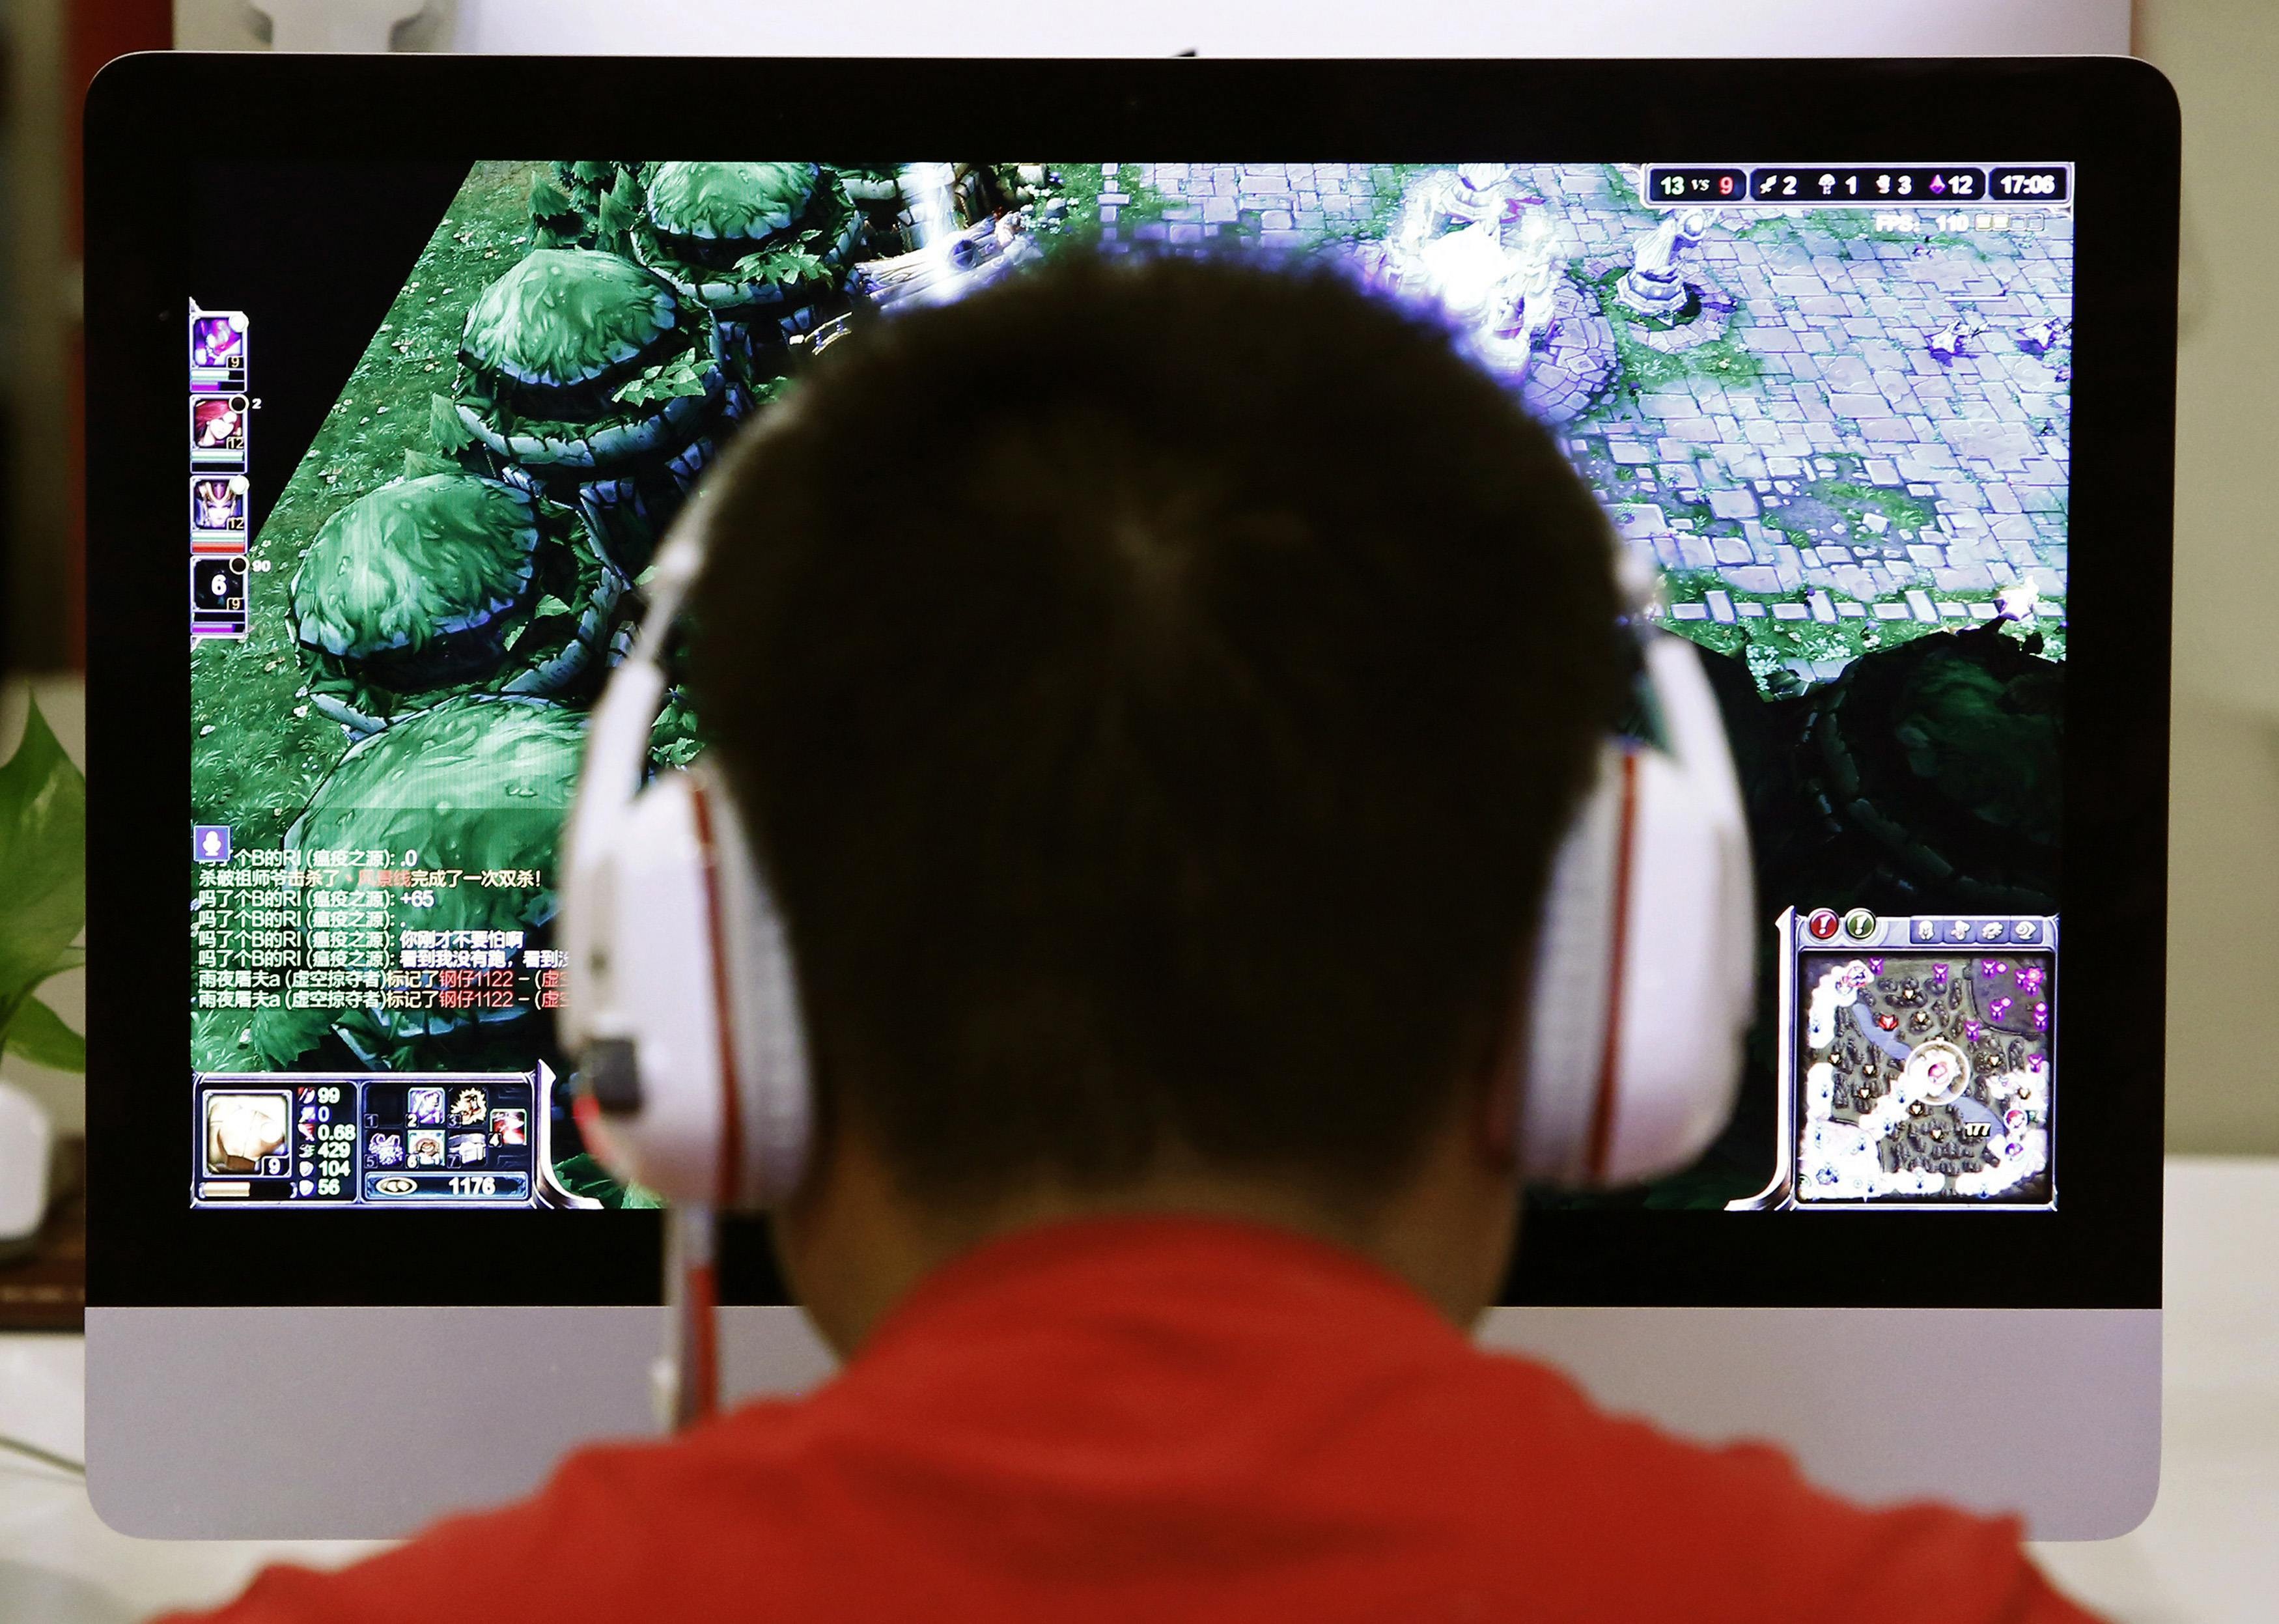 Gaming gives children more independence on the internet, which allows them to access violent games that are often well beyond their maturity level, psychologists say. Photo: Reuters